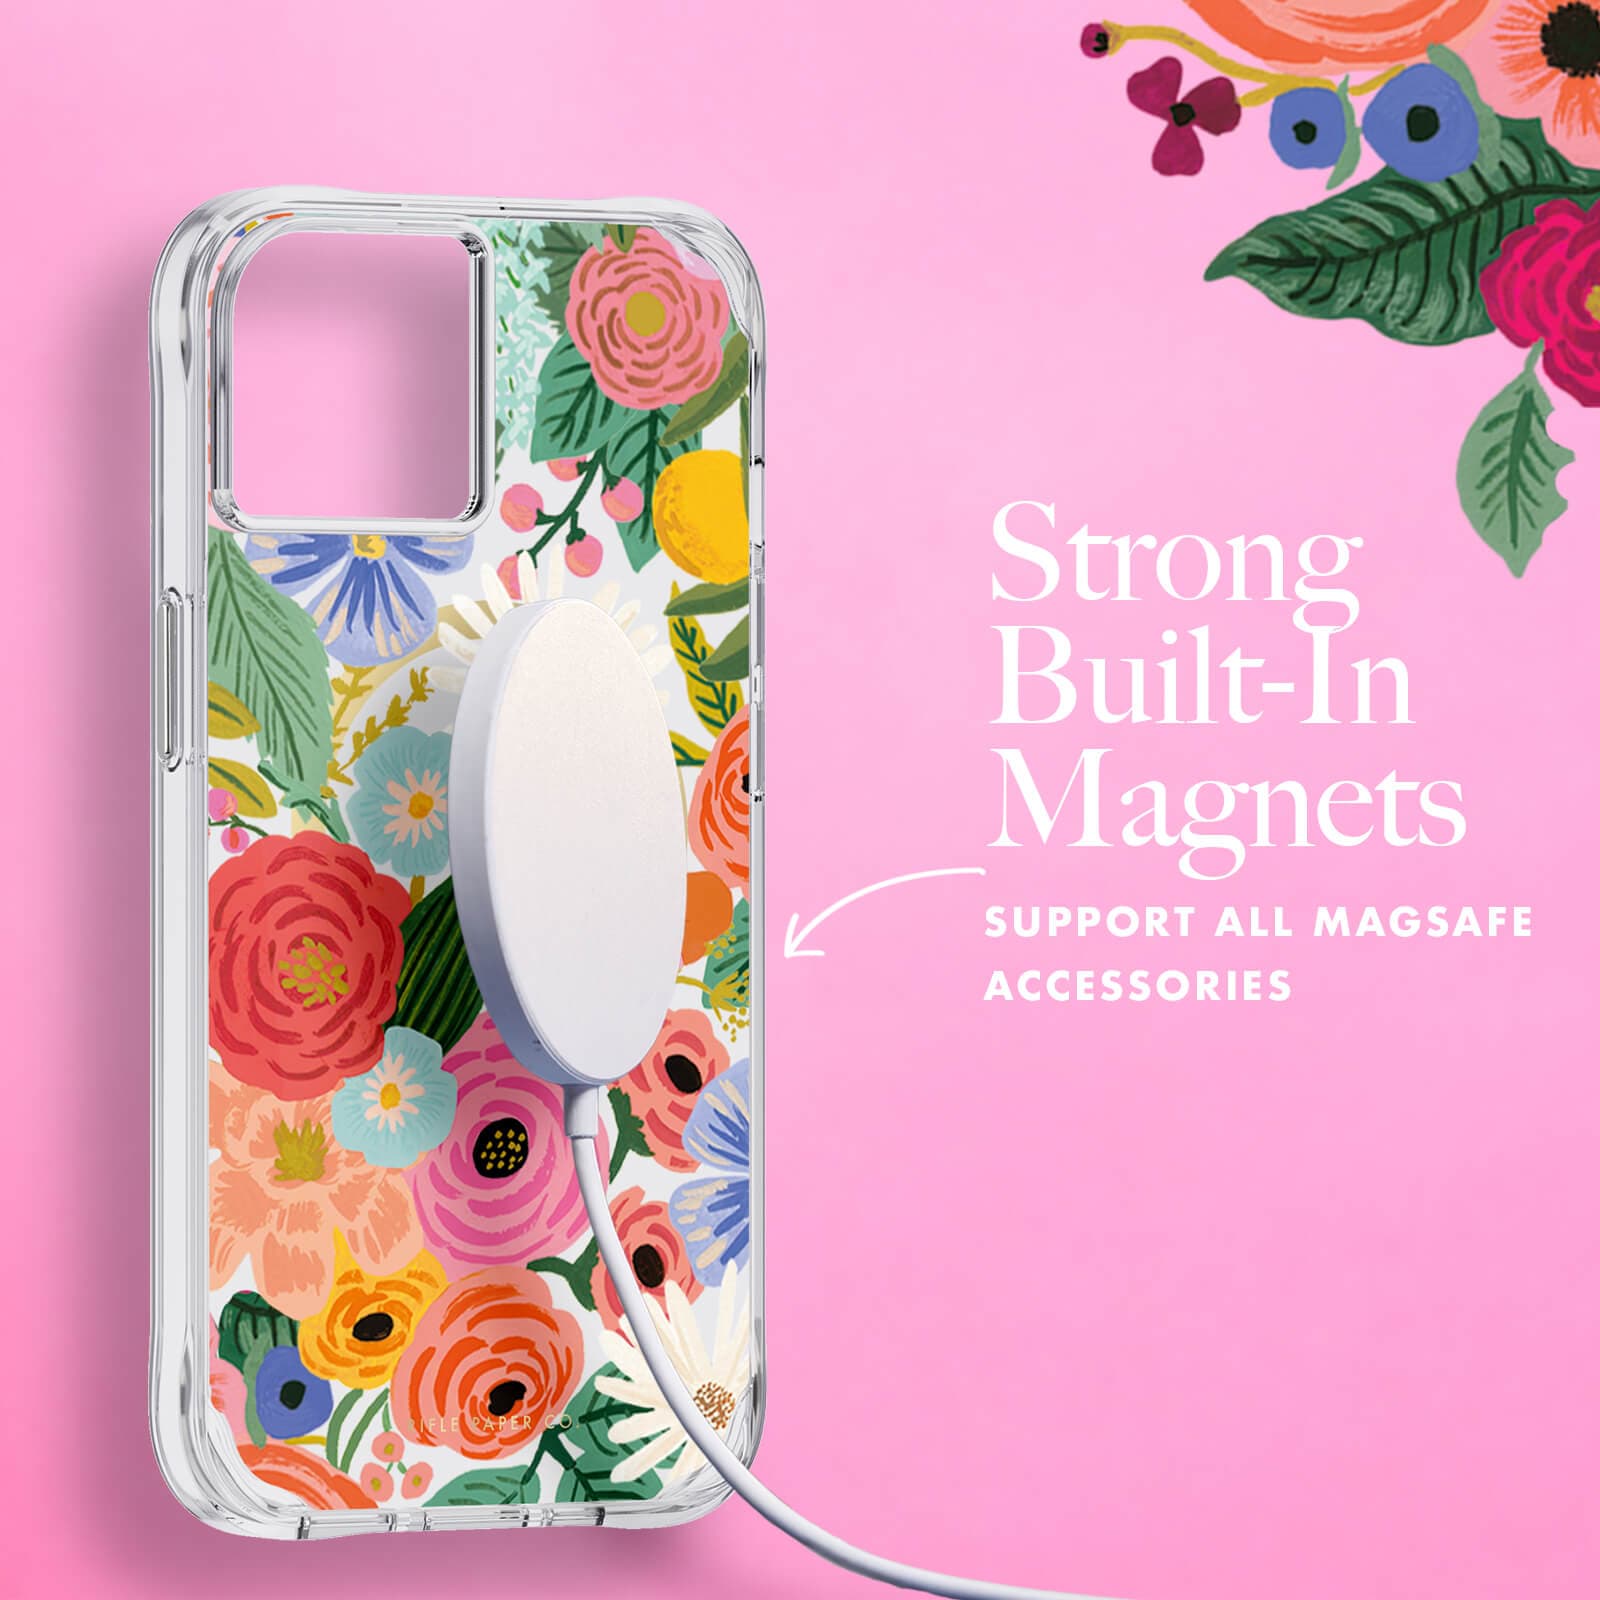 Strong built-in magnets support all MagSafe accessories. color::Garden Party Blush